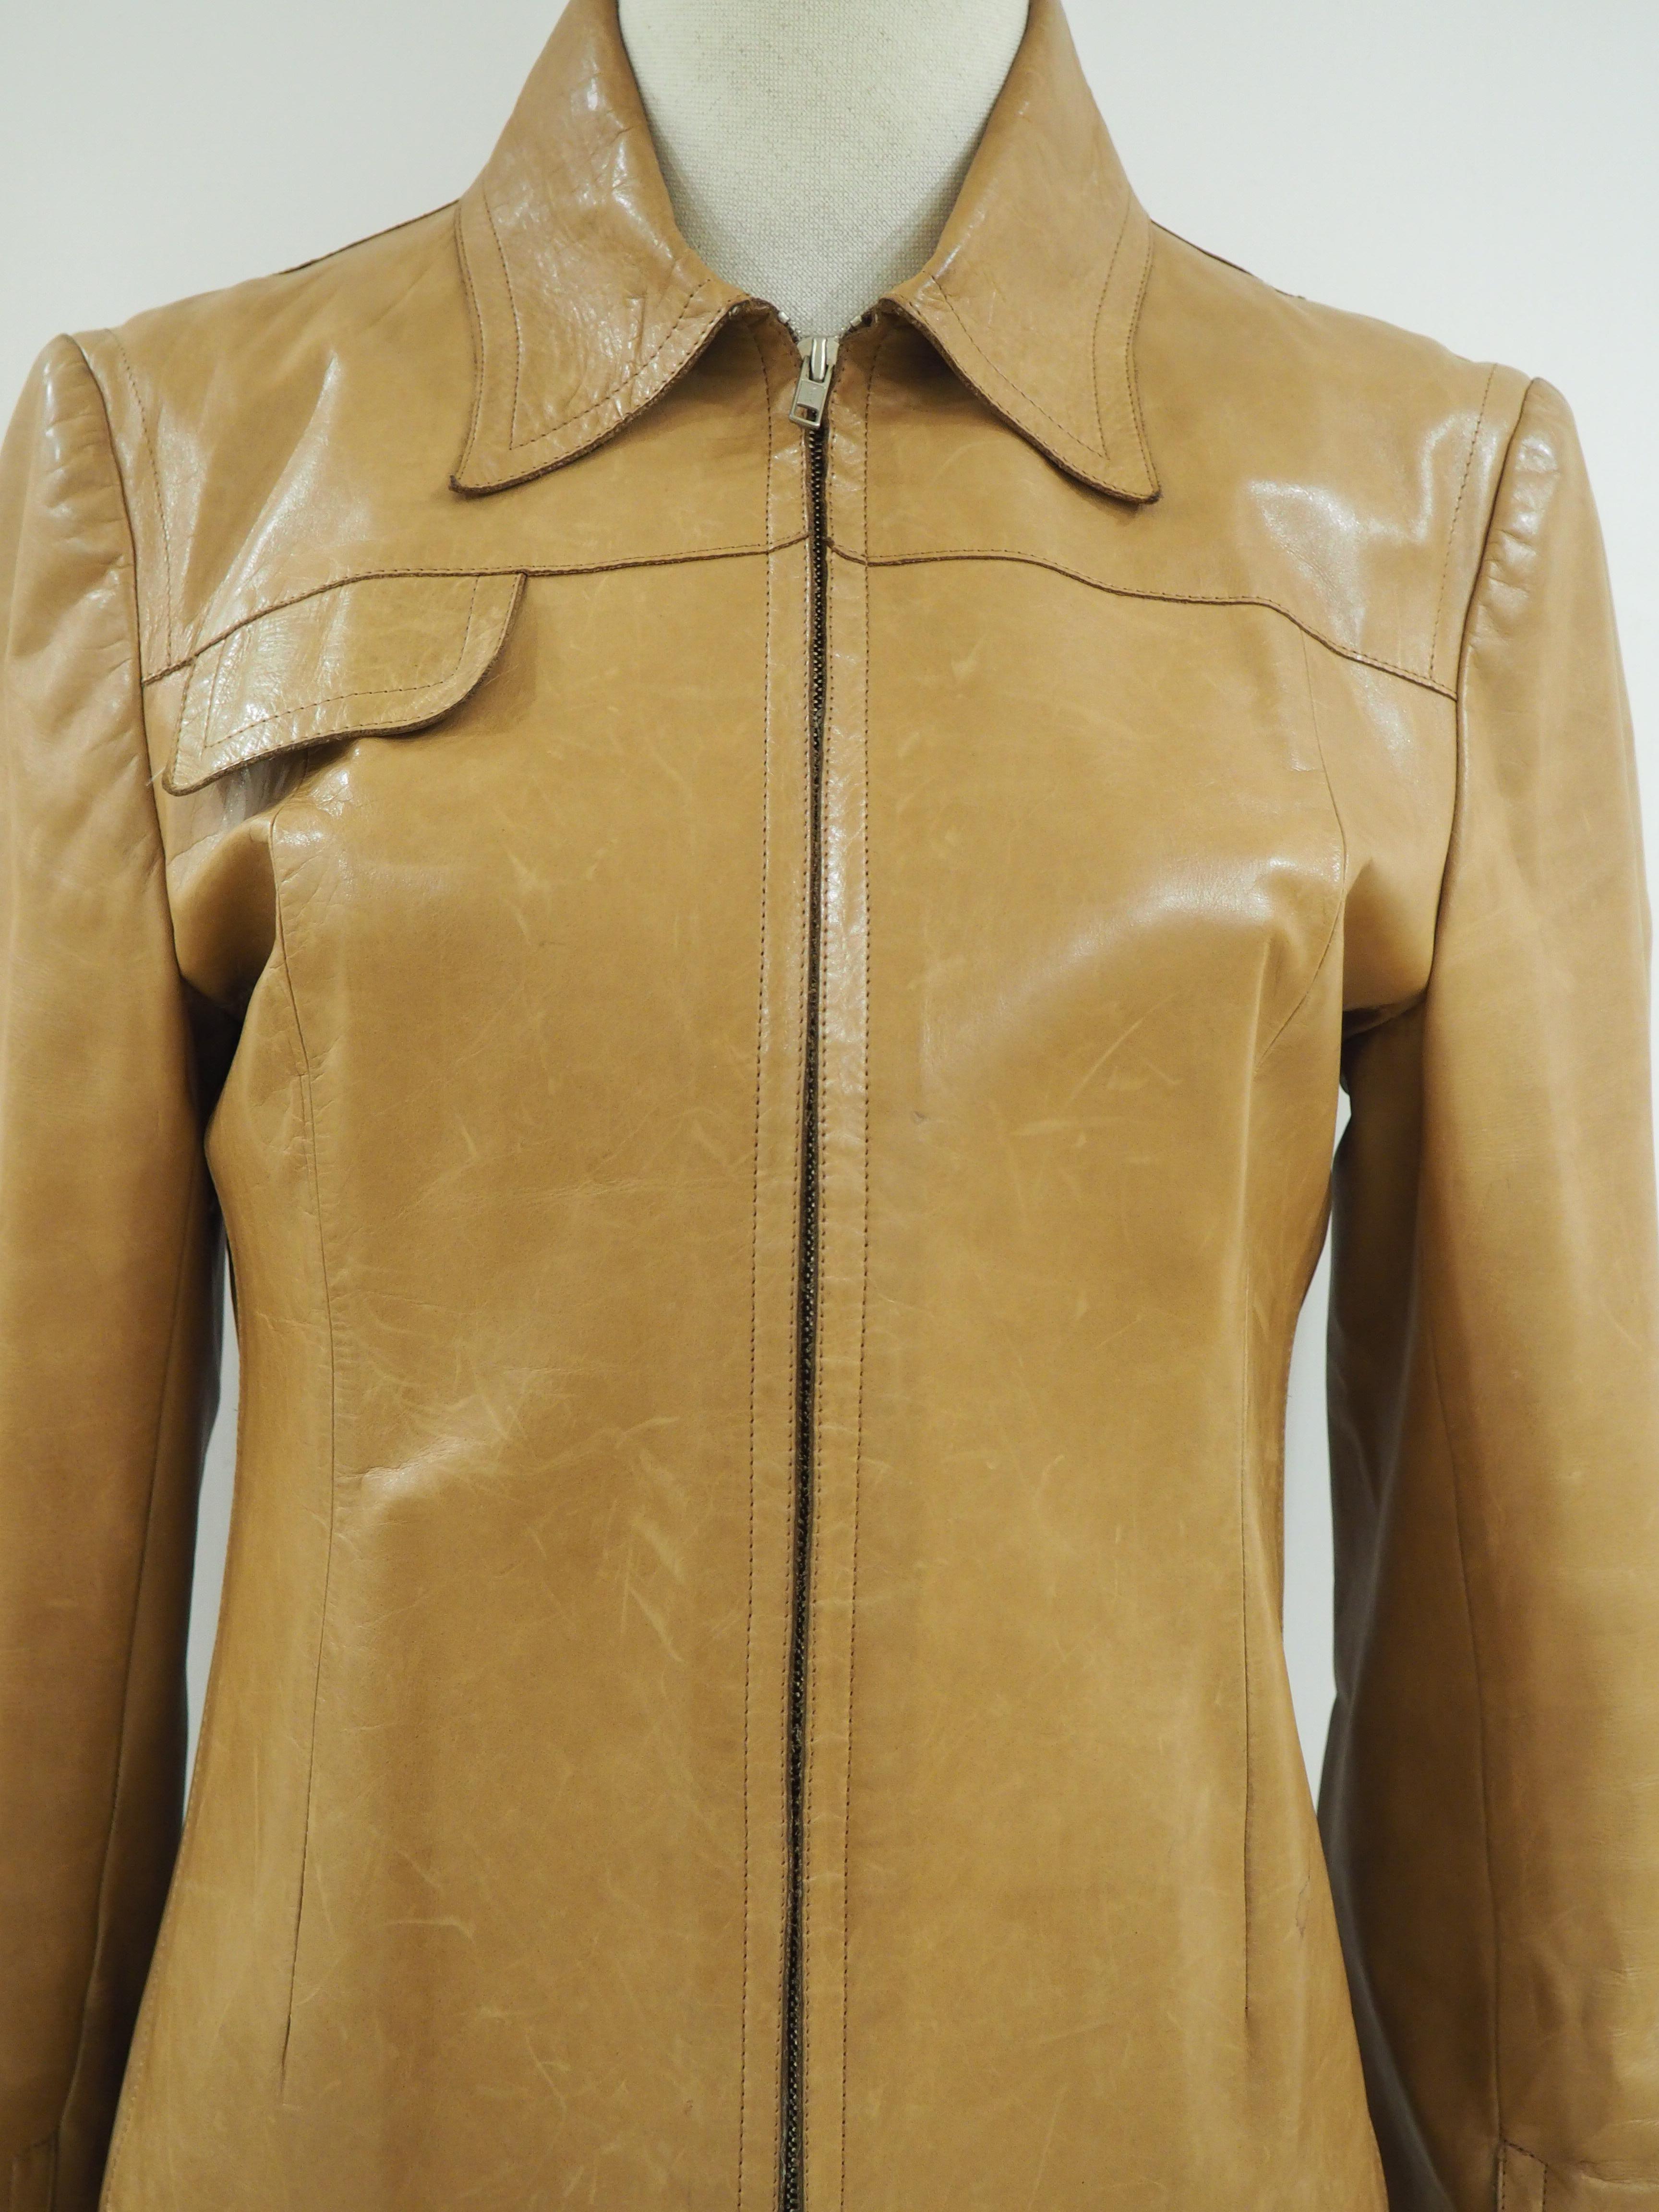 Costume National leather jacket
composition is leather, size 44
